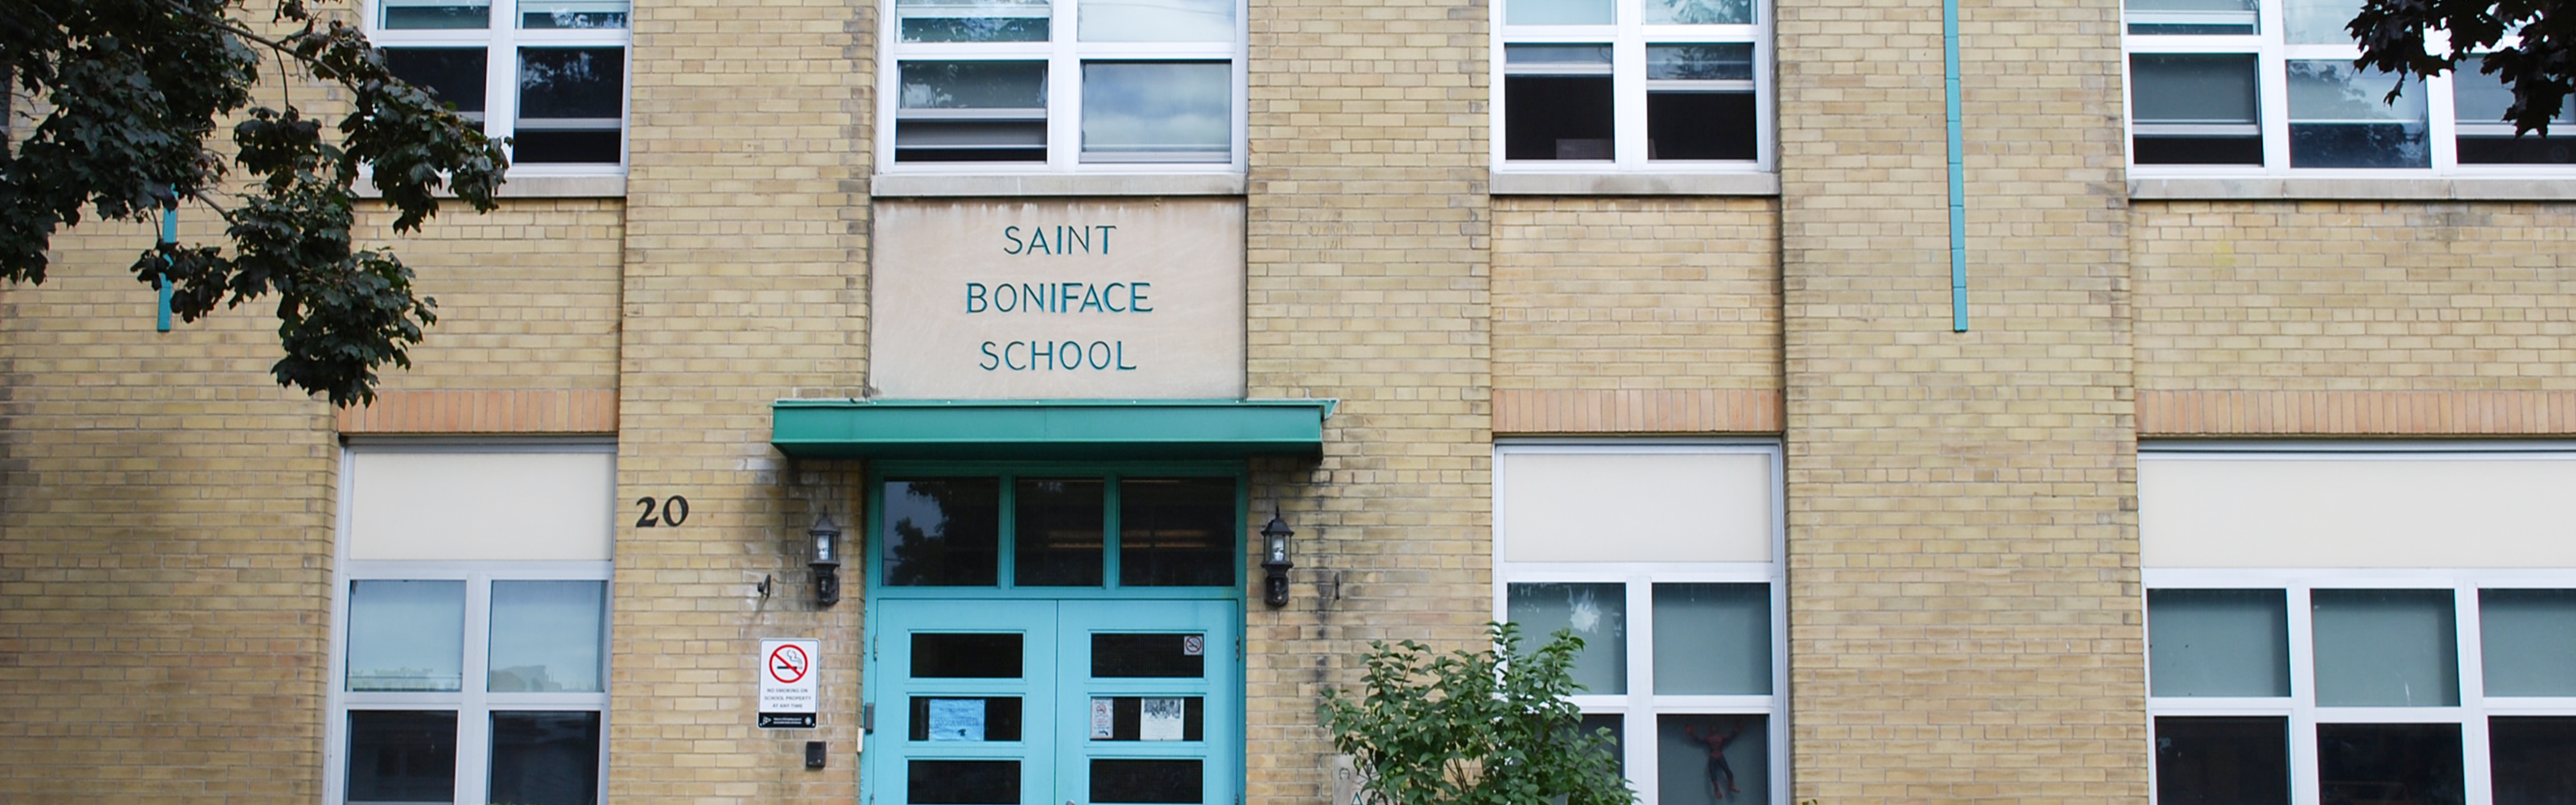 The front of the St. Boniface Catholic School building.